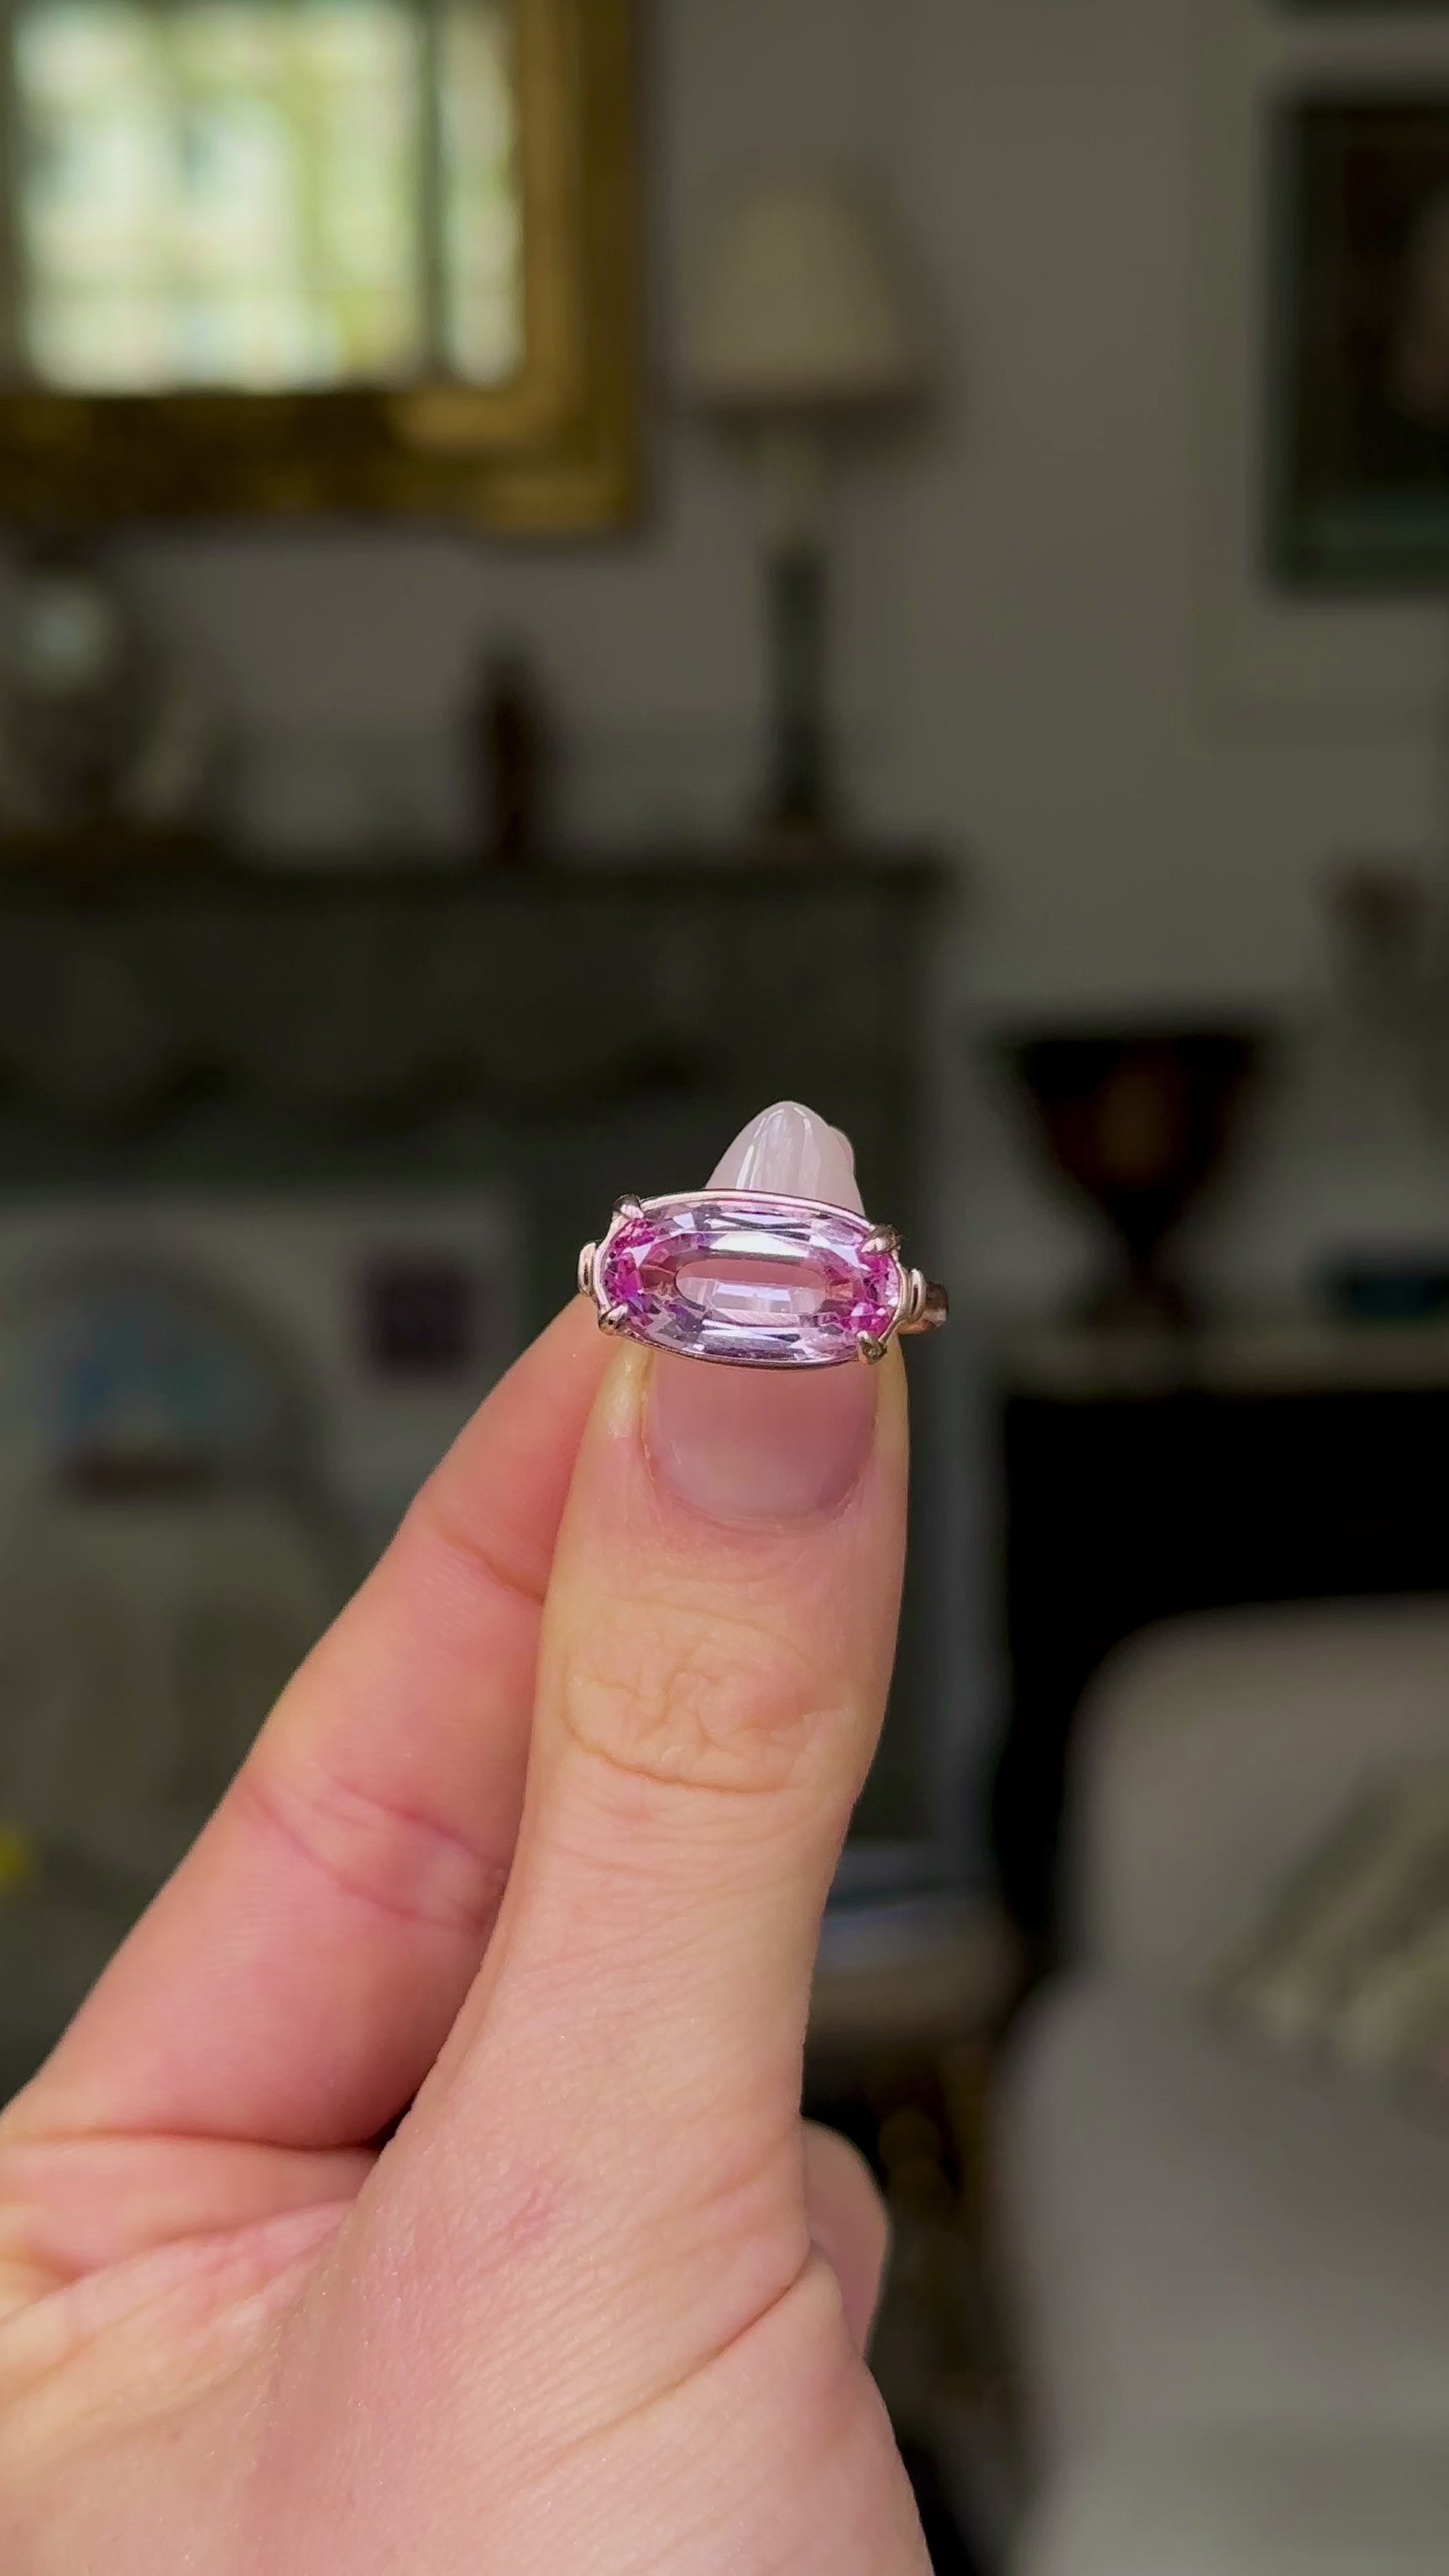 Vintage, 1940s Pale Pink Topaz Ring held in fingers and rotated to give perspective.